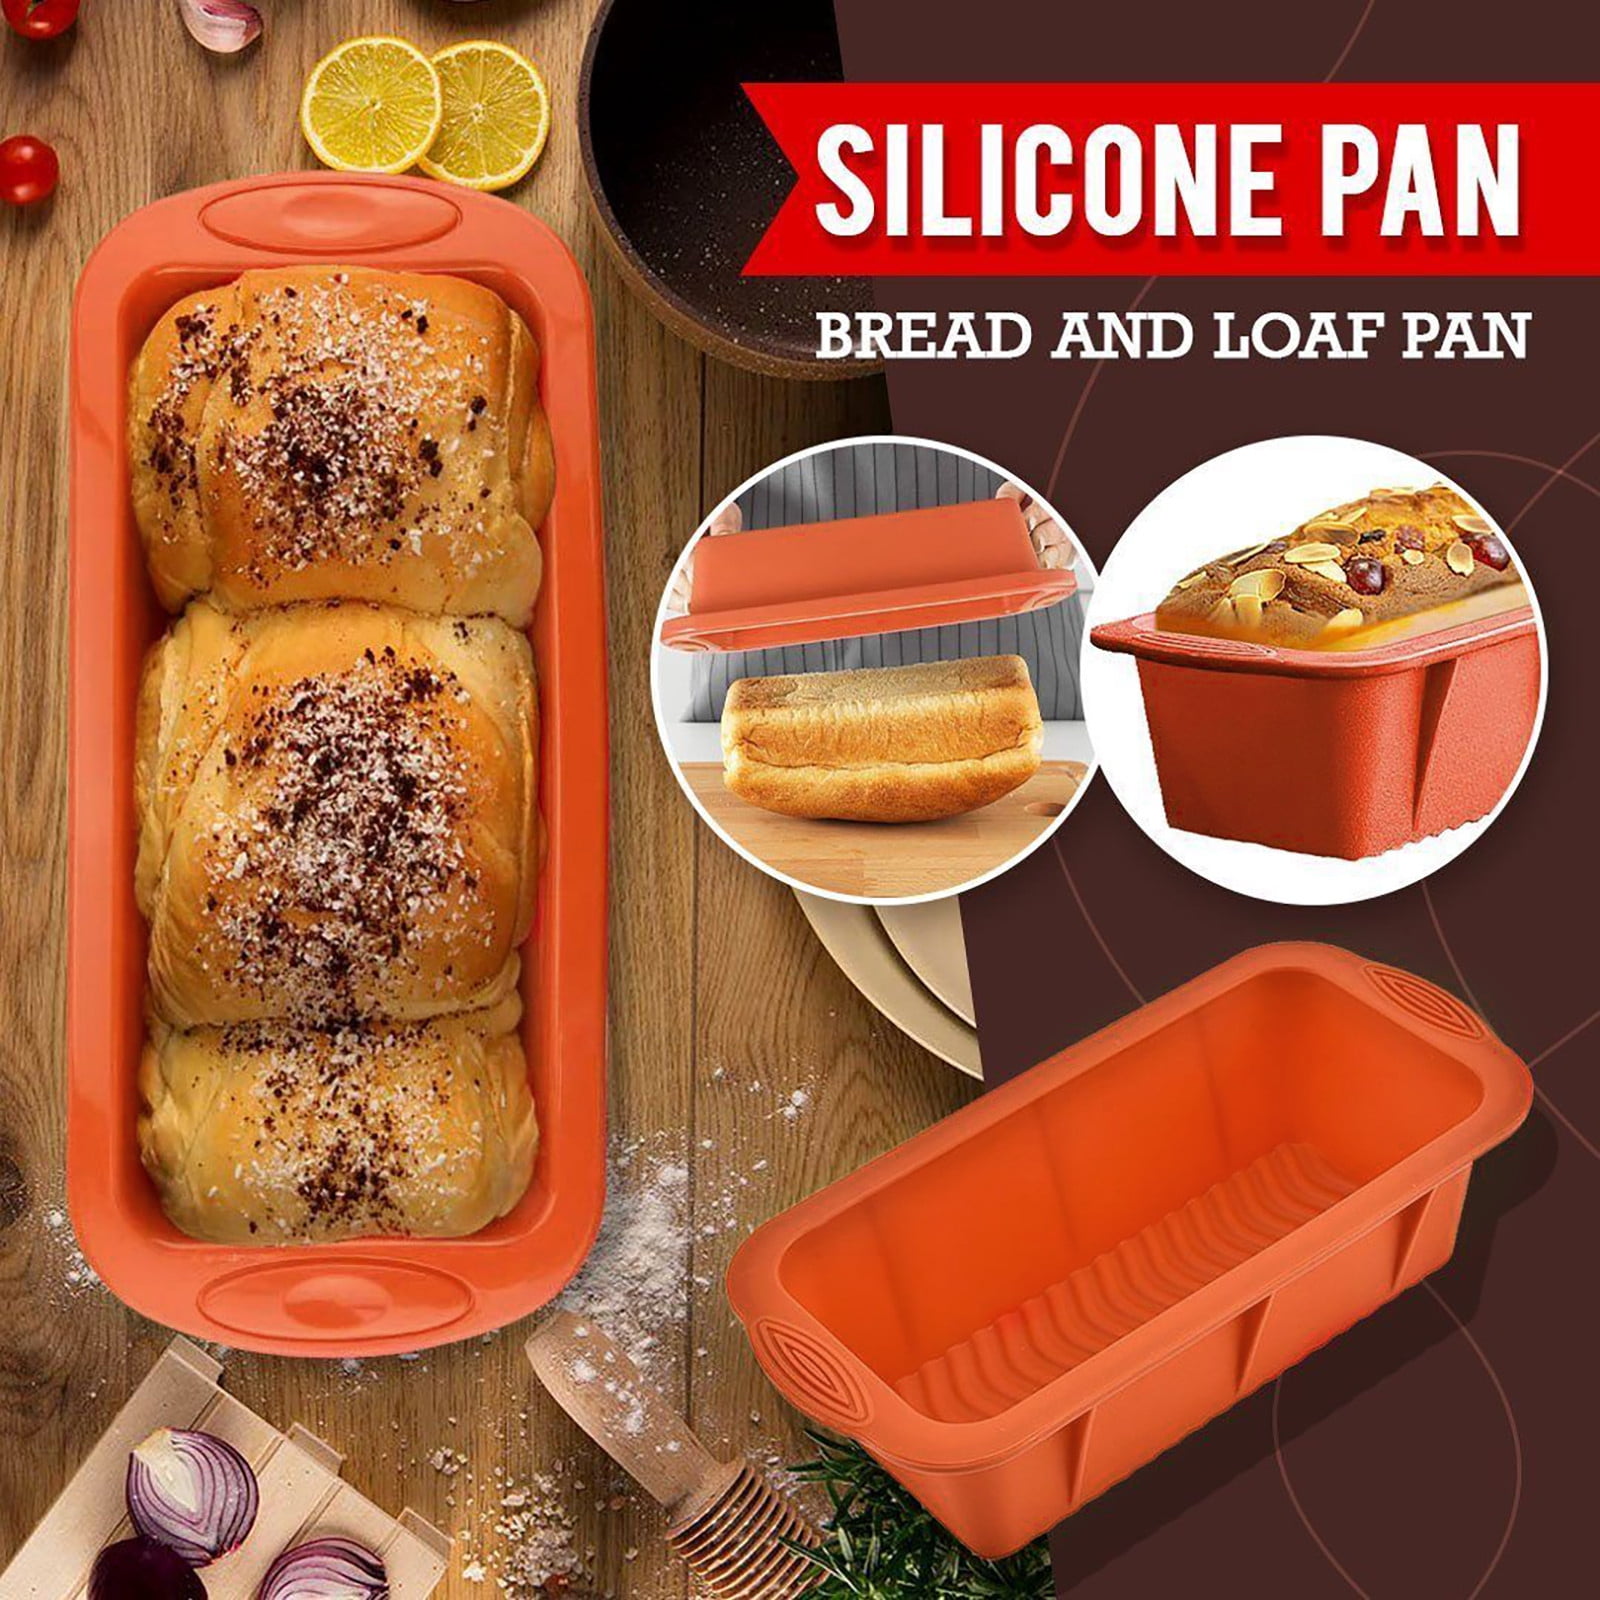 VBVC Silicone Loaf Pan,Non Stick and Easy To Release Rectangular Silicone  Mini Cake for Baking Bread,Flexible Bpa Free Silicone Baking Pan